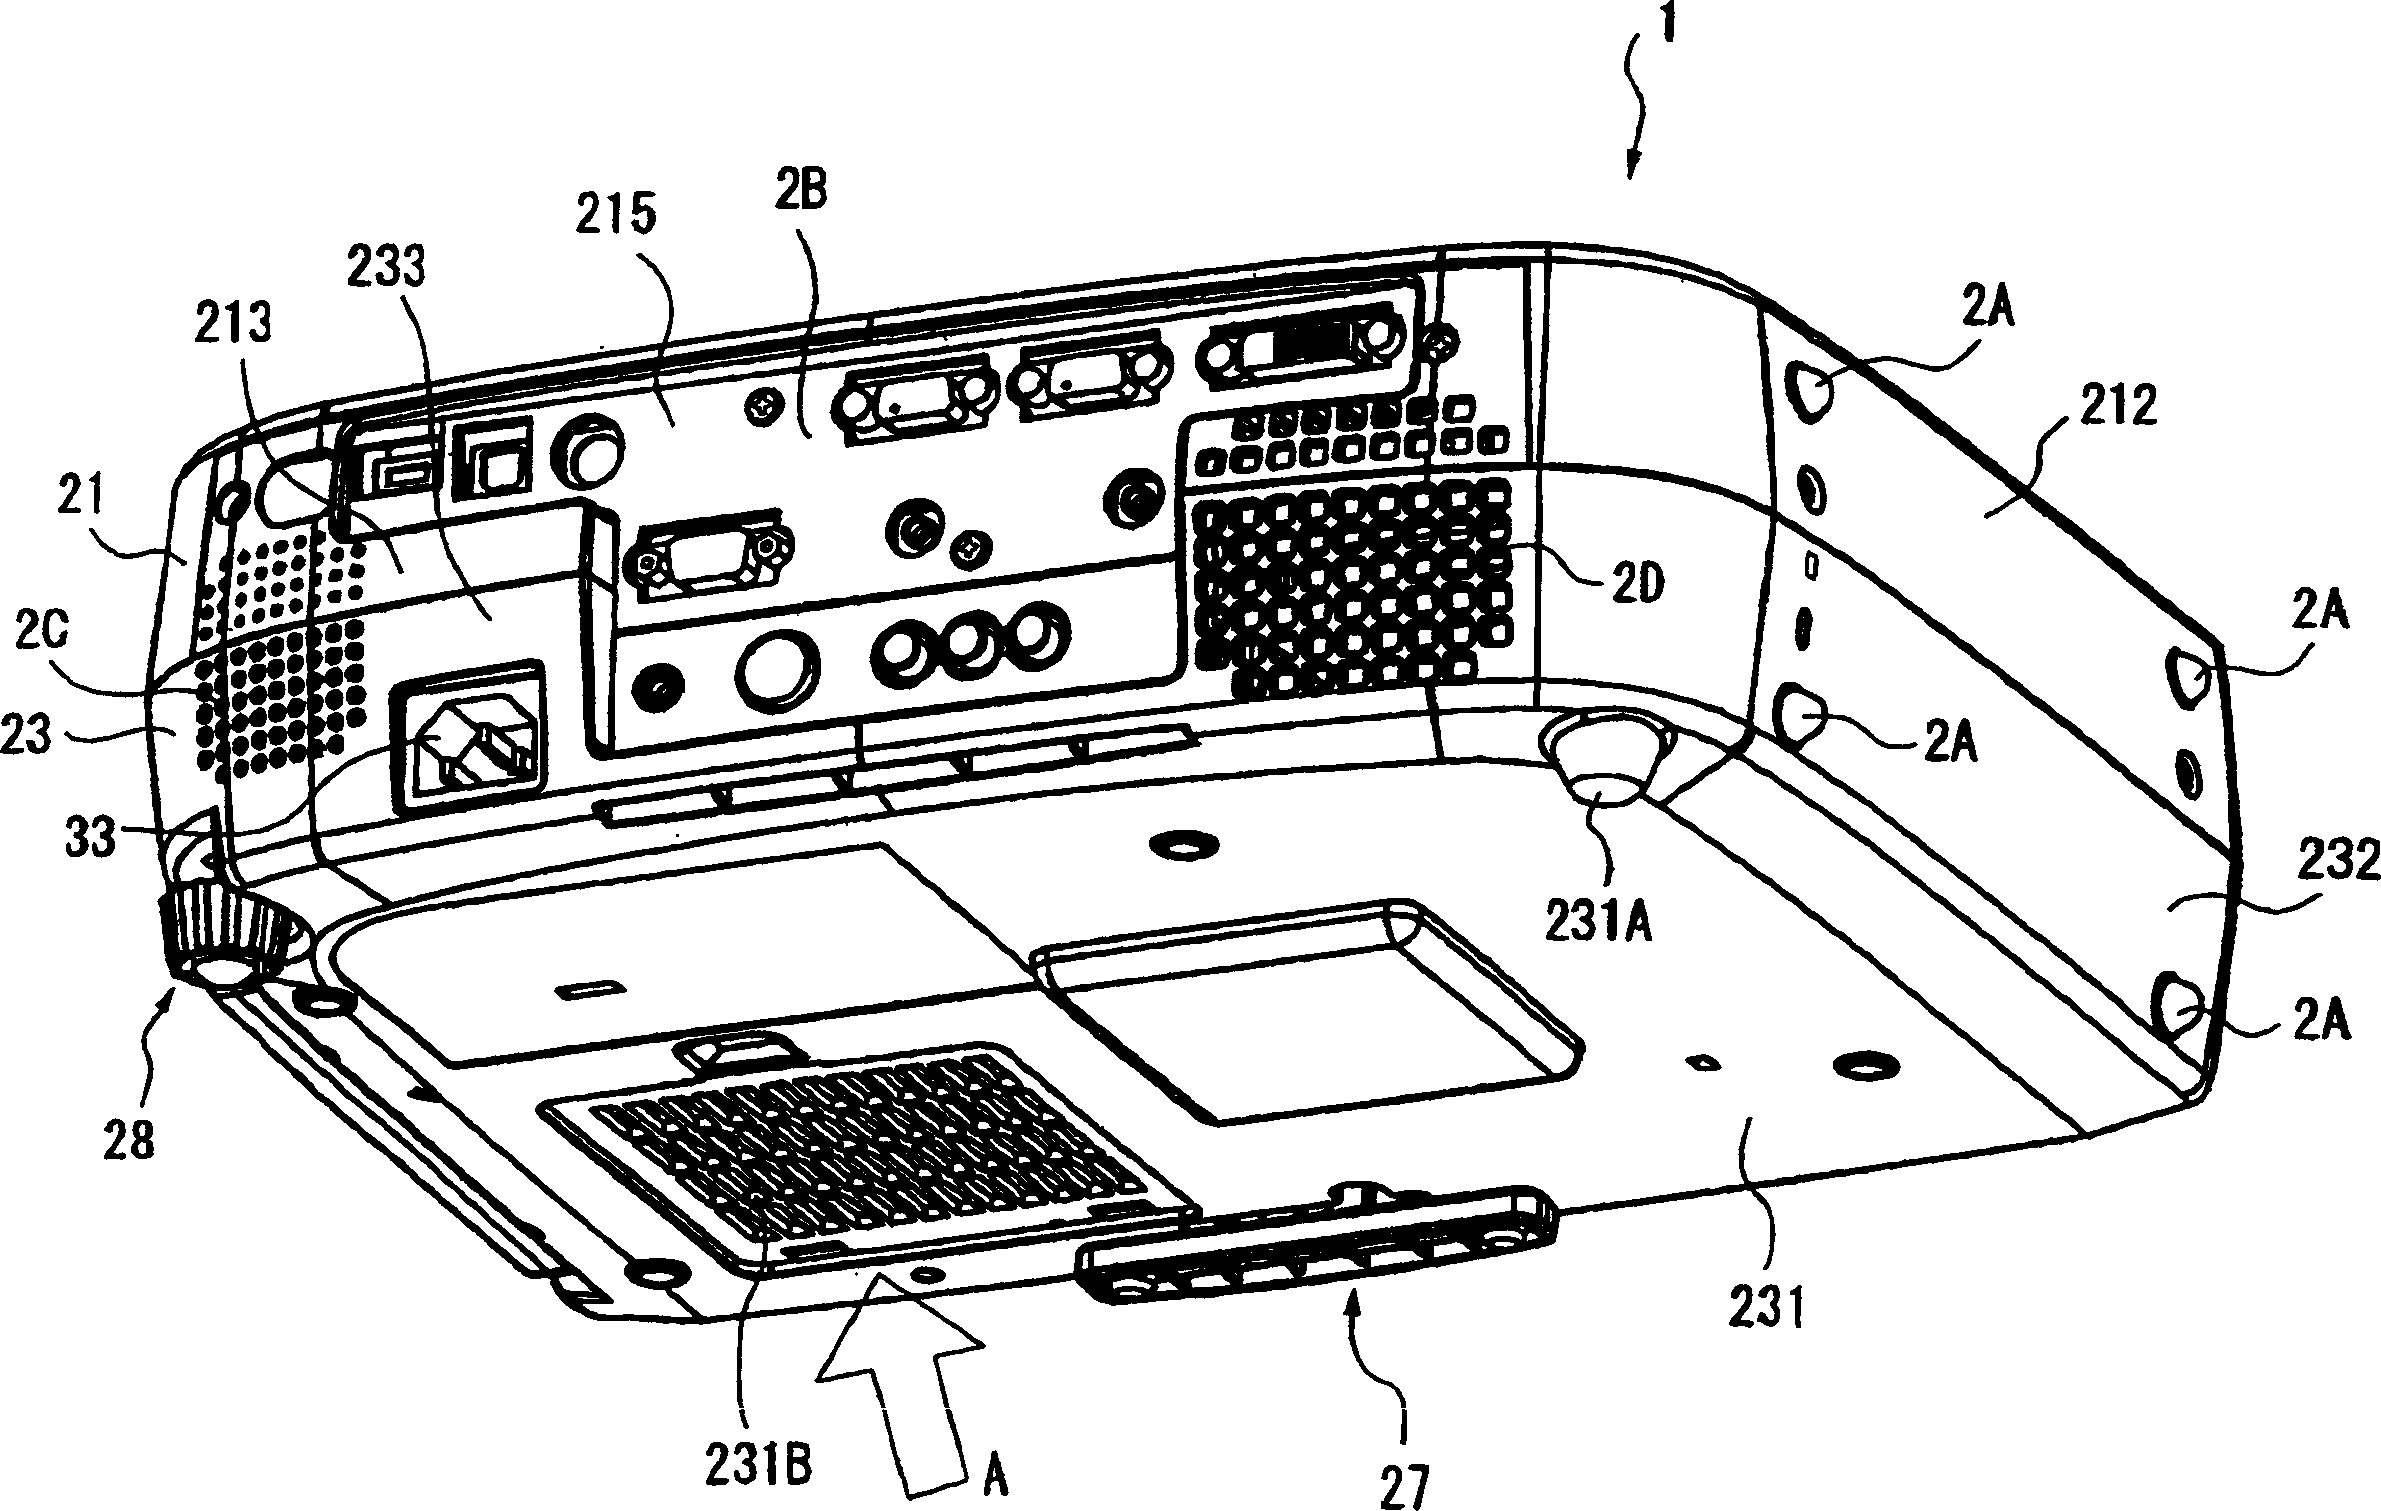 Optical device and projector